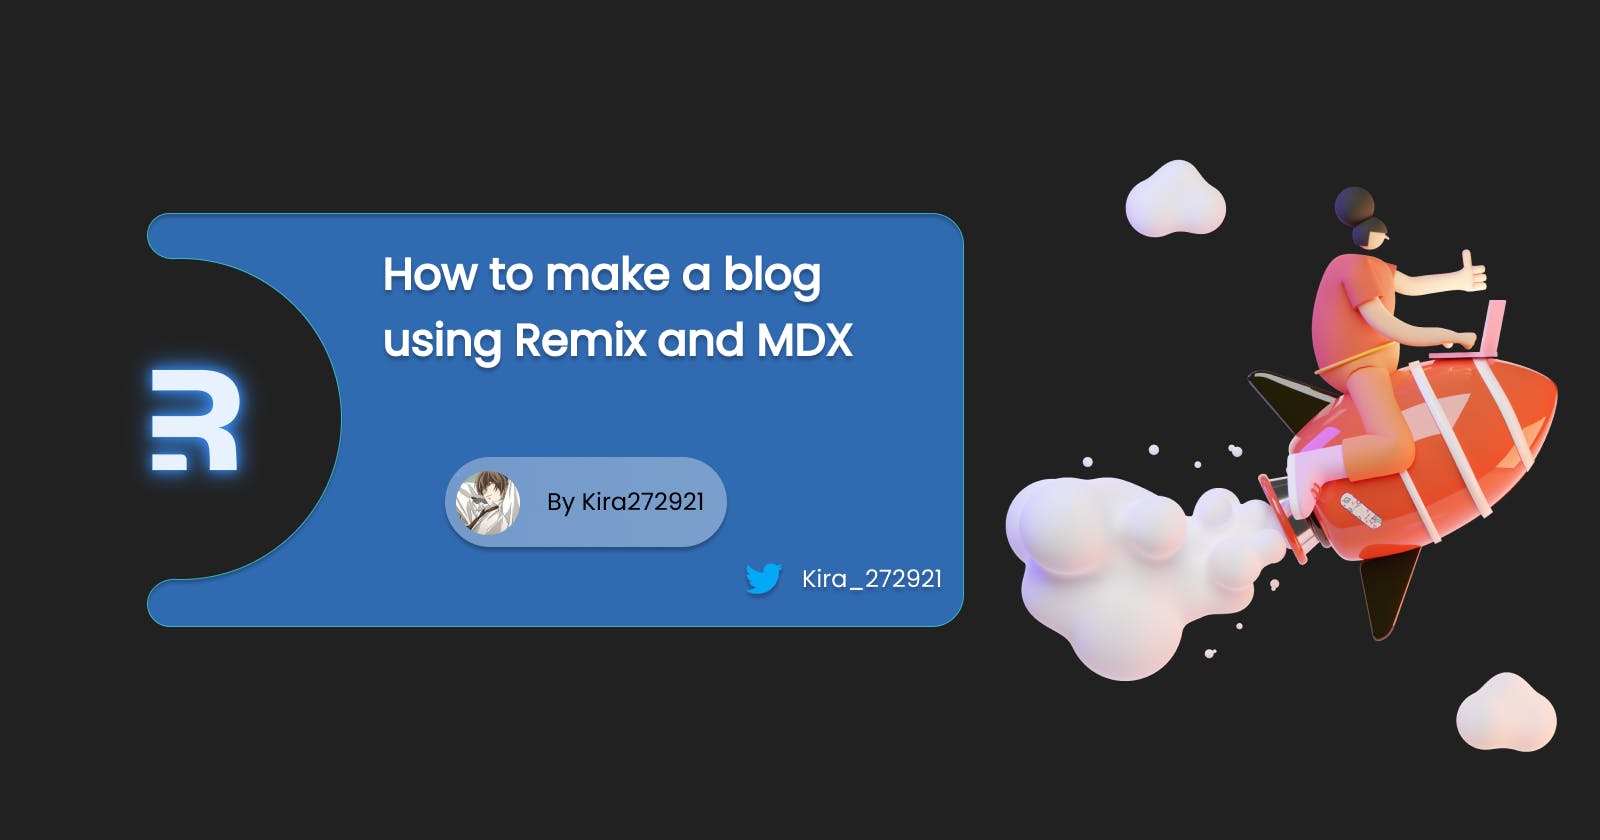 How to build a blog using Remix and MDX